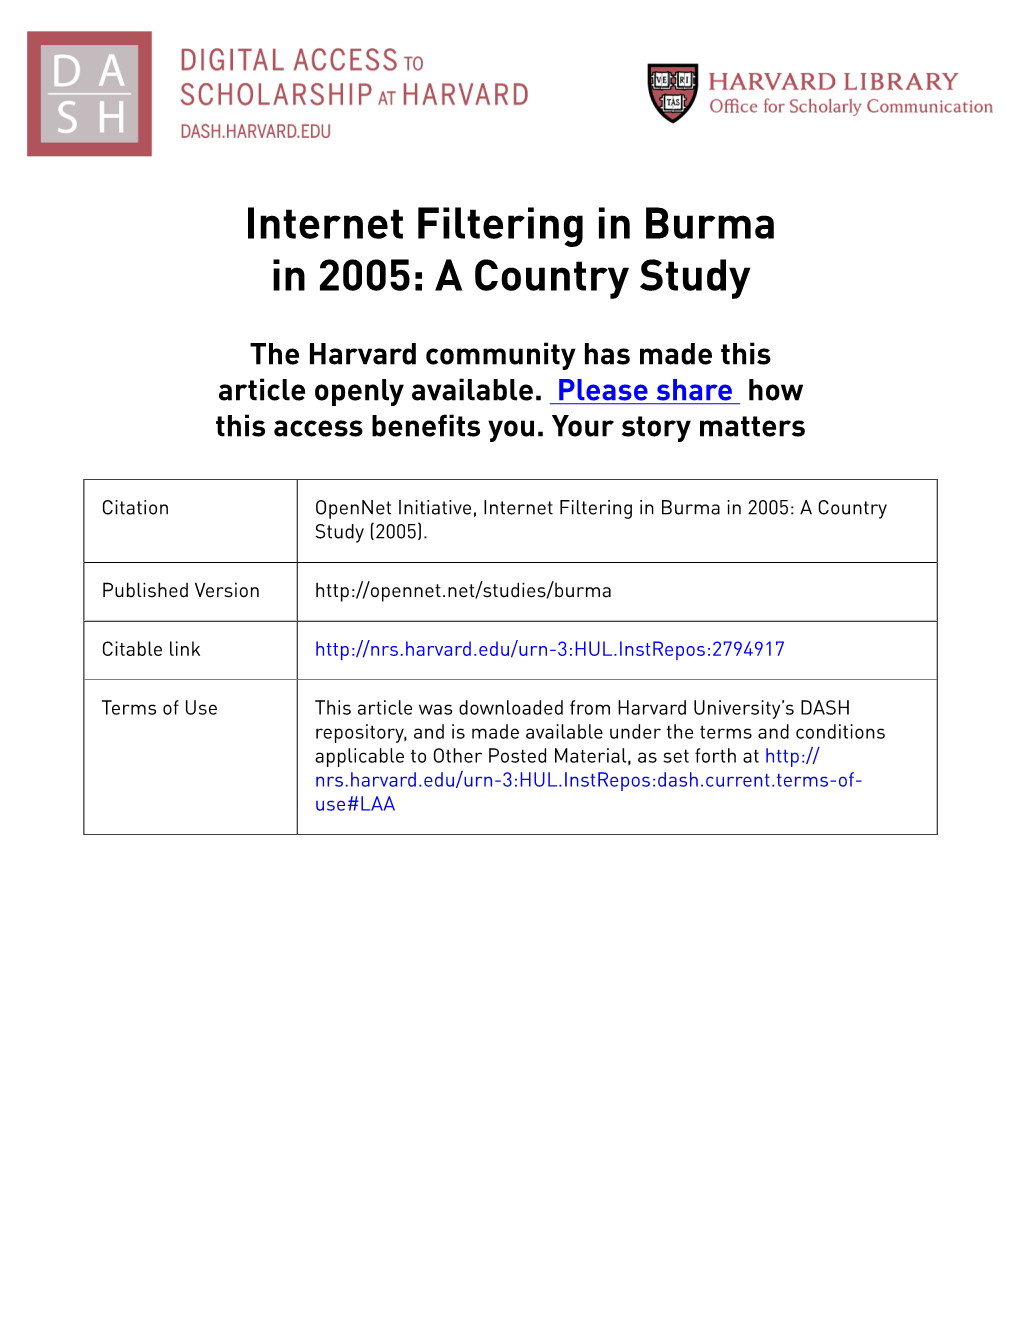 Internet Filtering in Burma in 2005: a Country Study